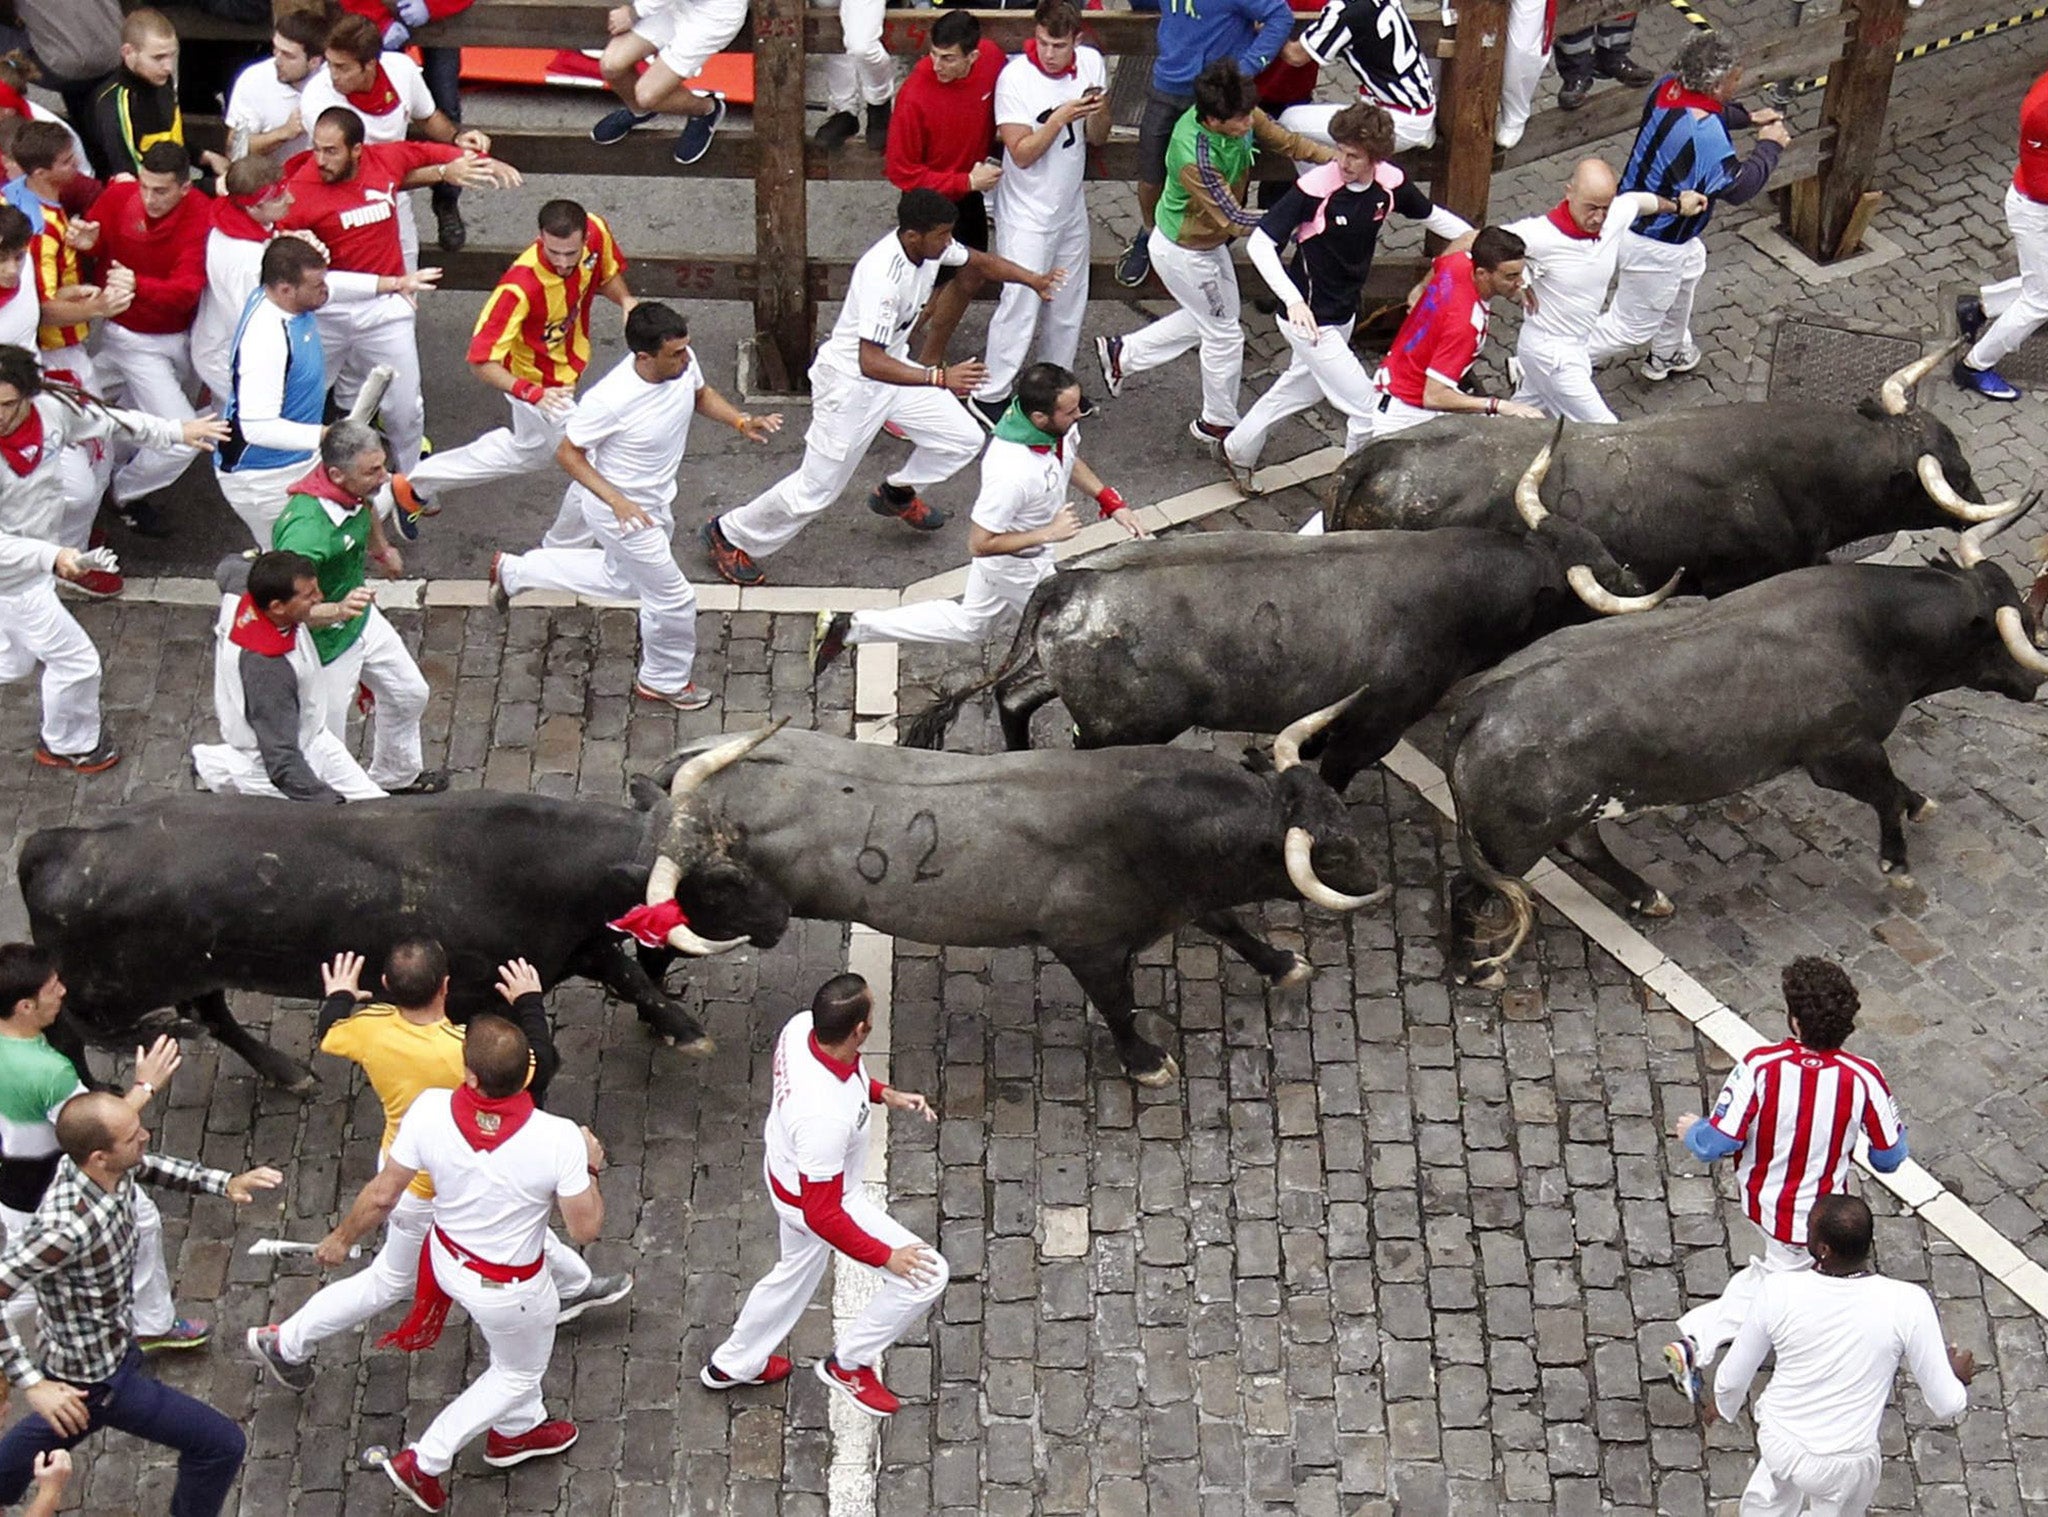 Several 'mozos' or runners are chased by bulls from Miura ranch during the eighth and last bullrun of San Fermin 2016 in Pamplona, northern Spain